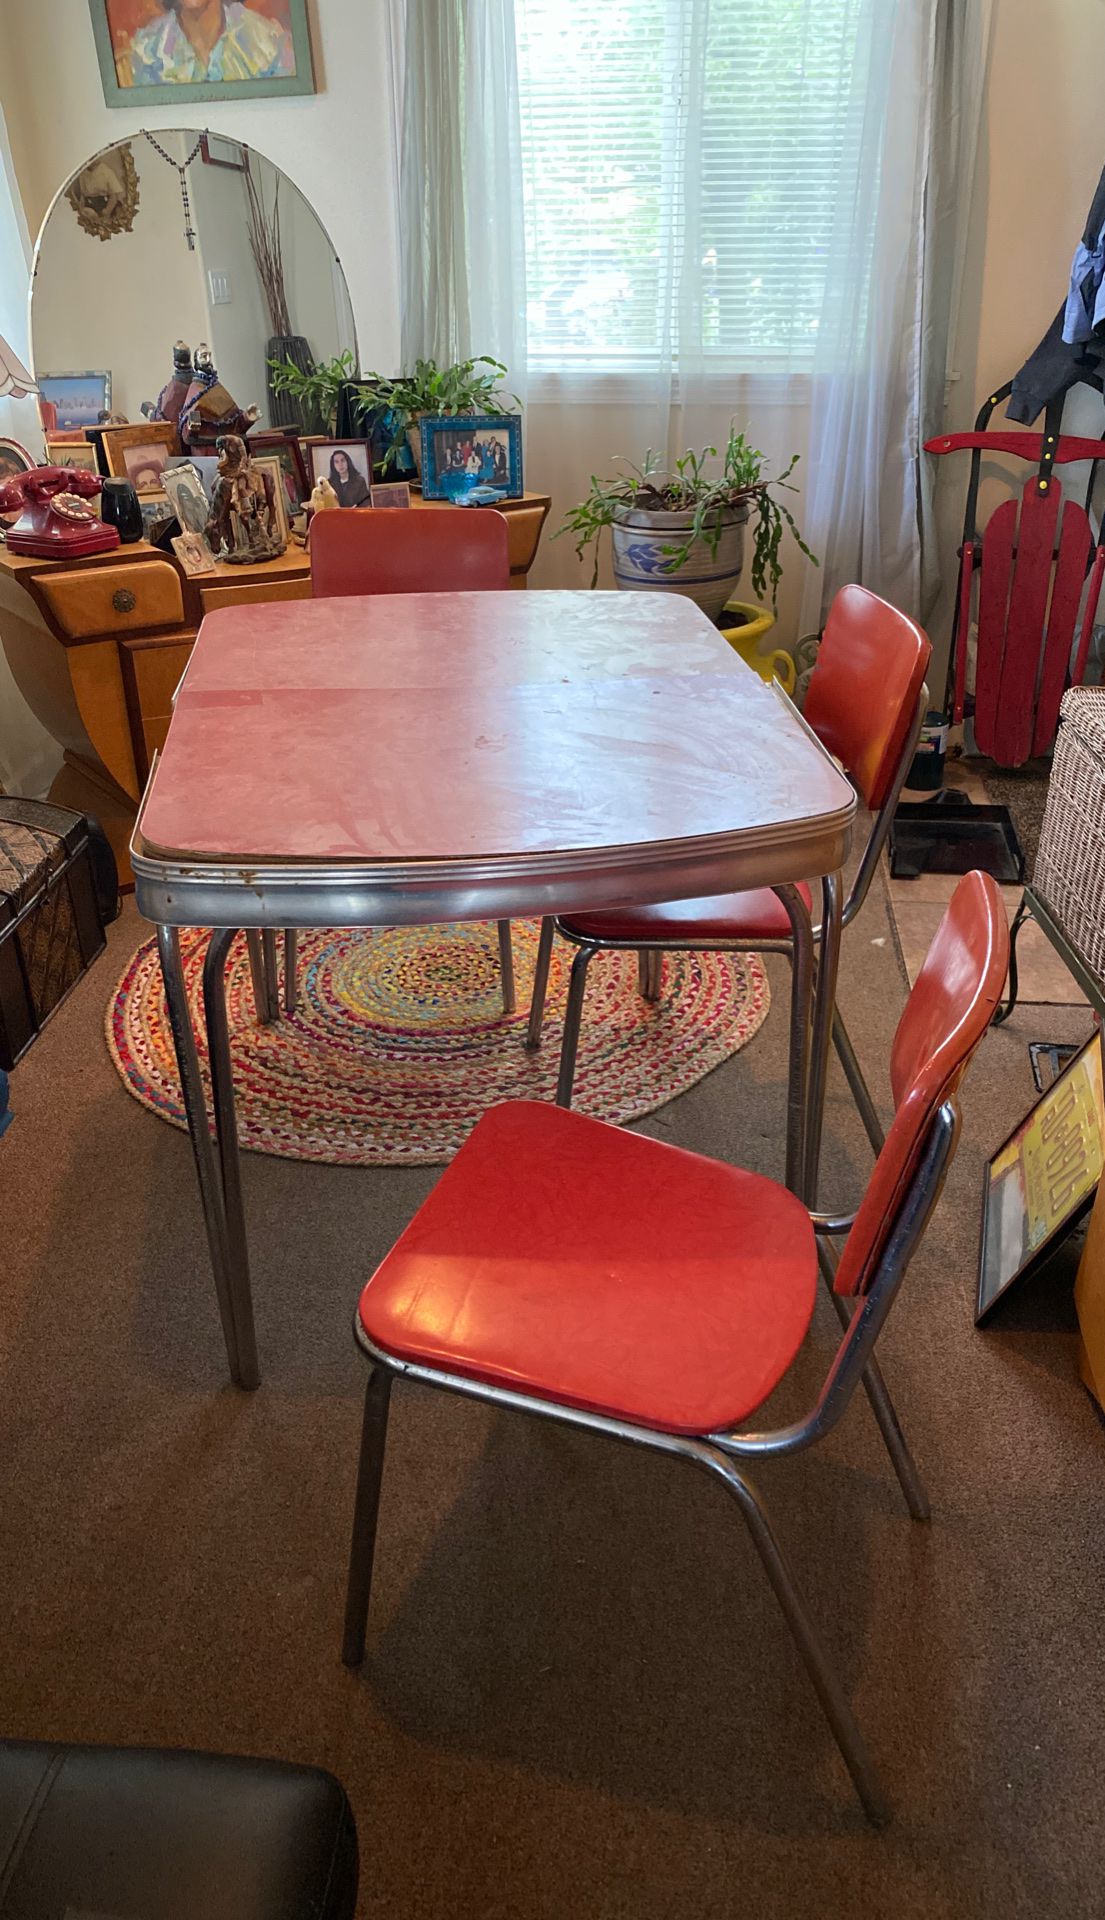 Retro 50s table and chairs four chairs a table extension three chairs are in good shape one needs a back rest also one kitchen stepping stool seat al